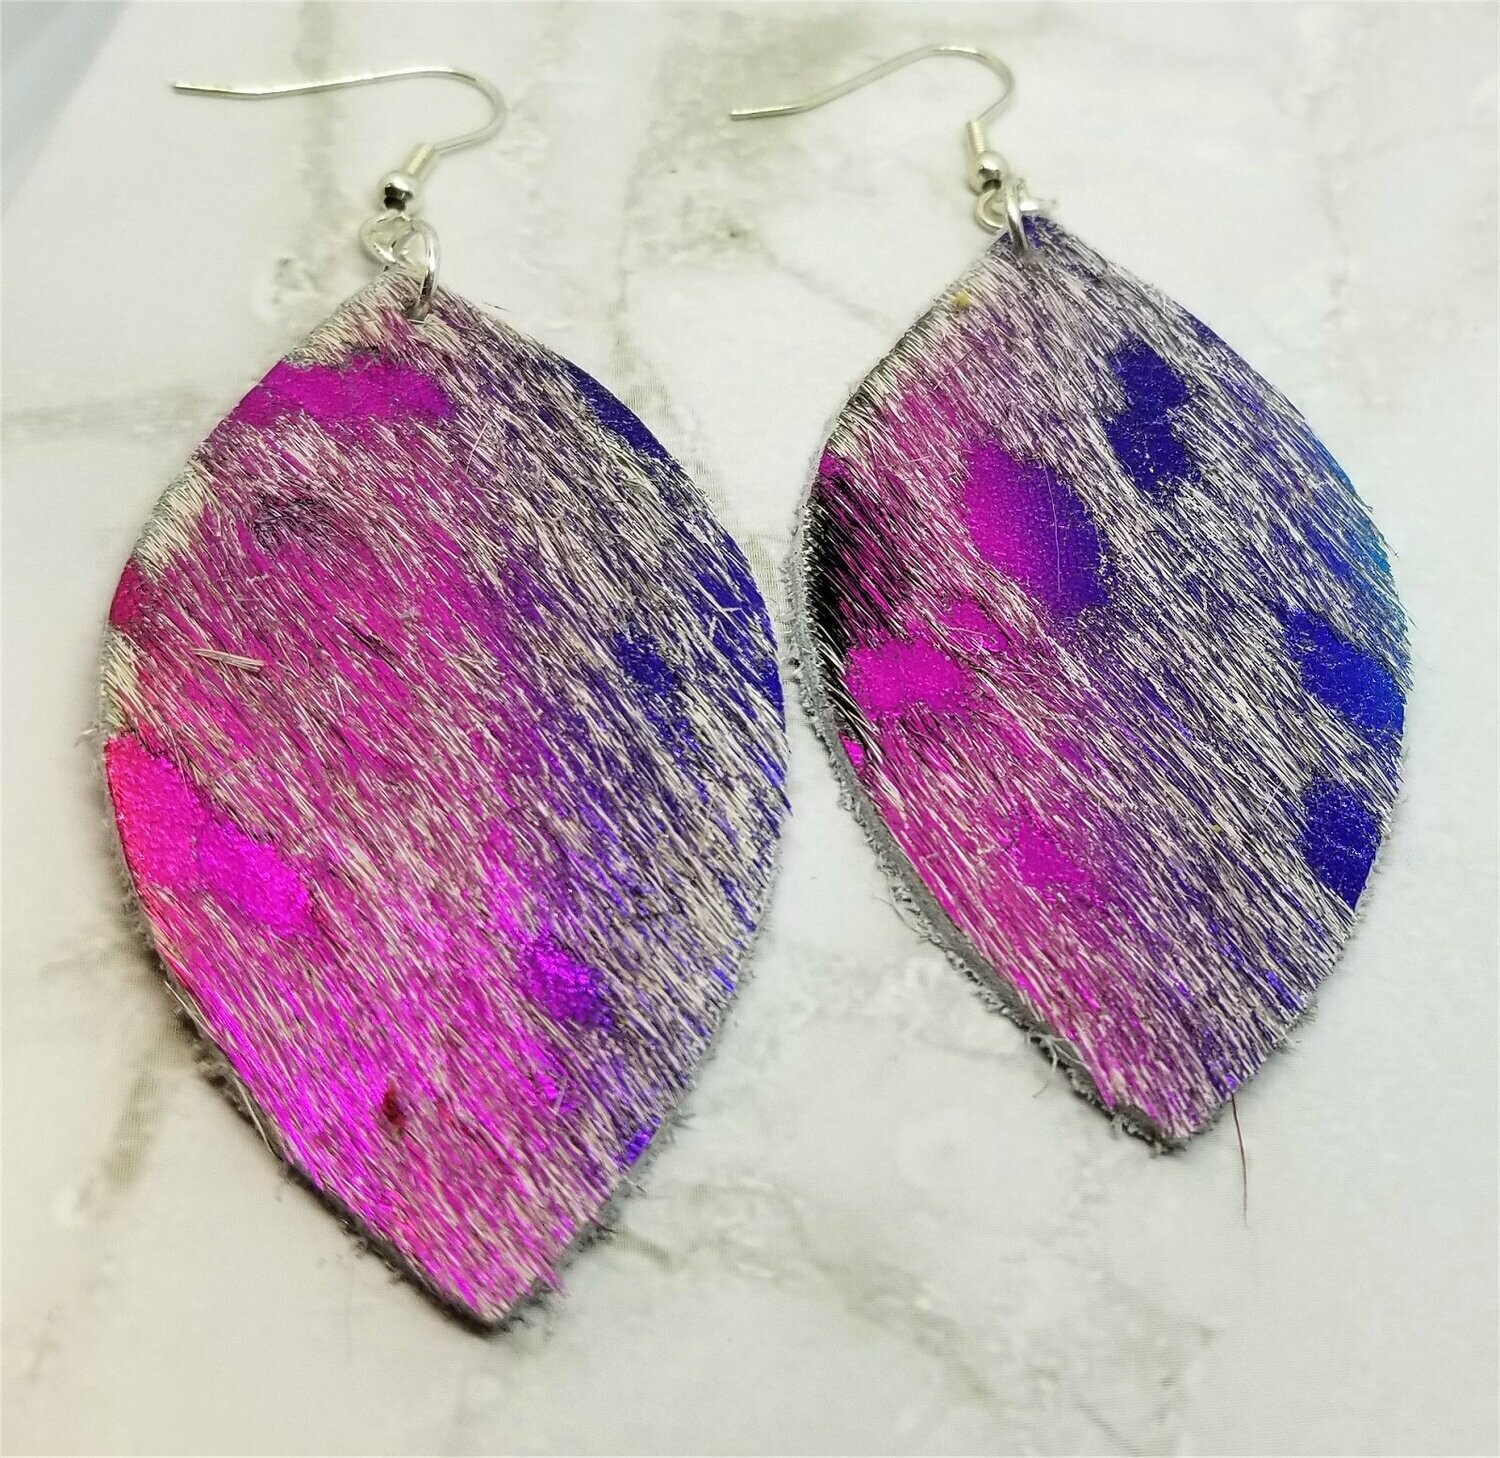 Metallic Pink and Purple with White Hair on Hide Leather Almond Shaped Earrings